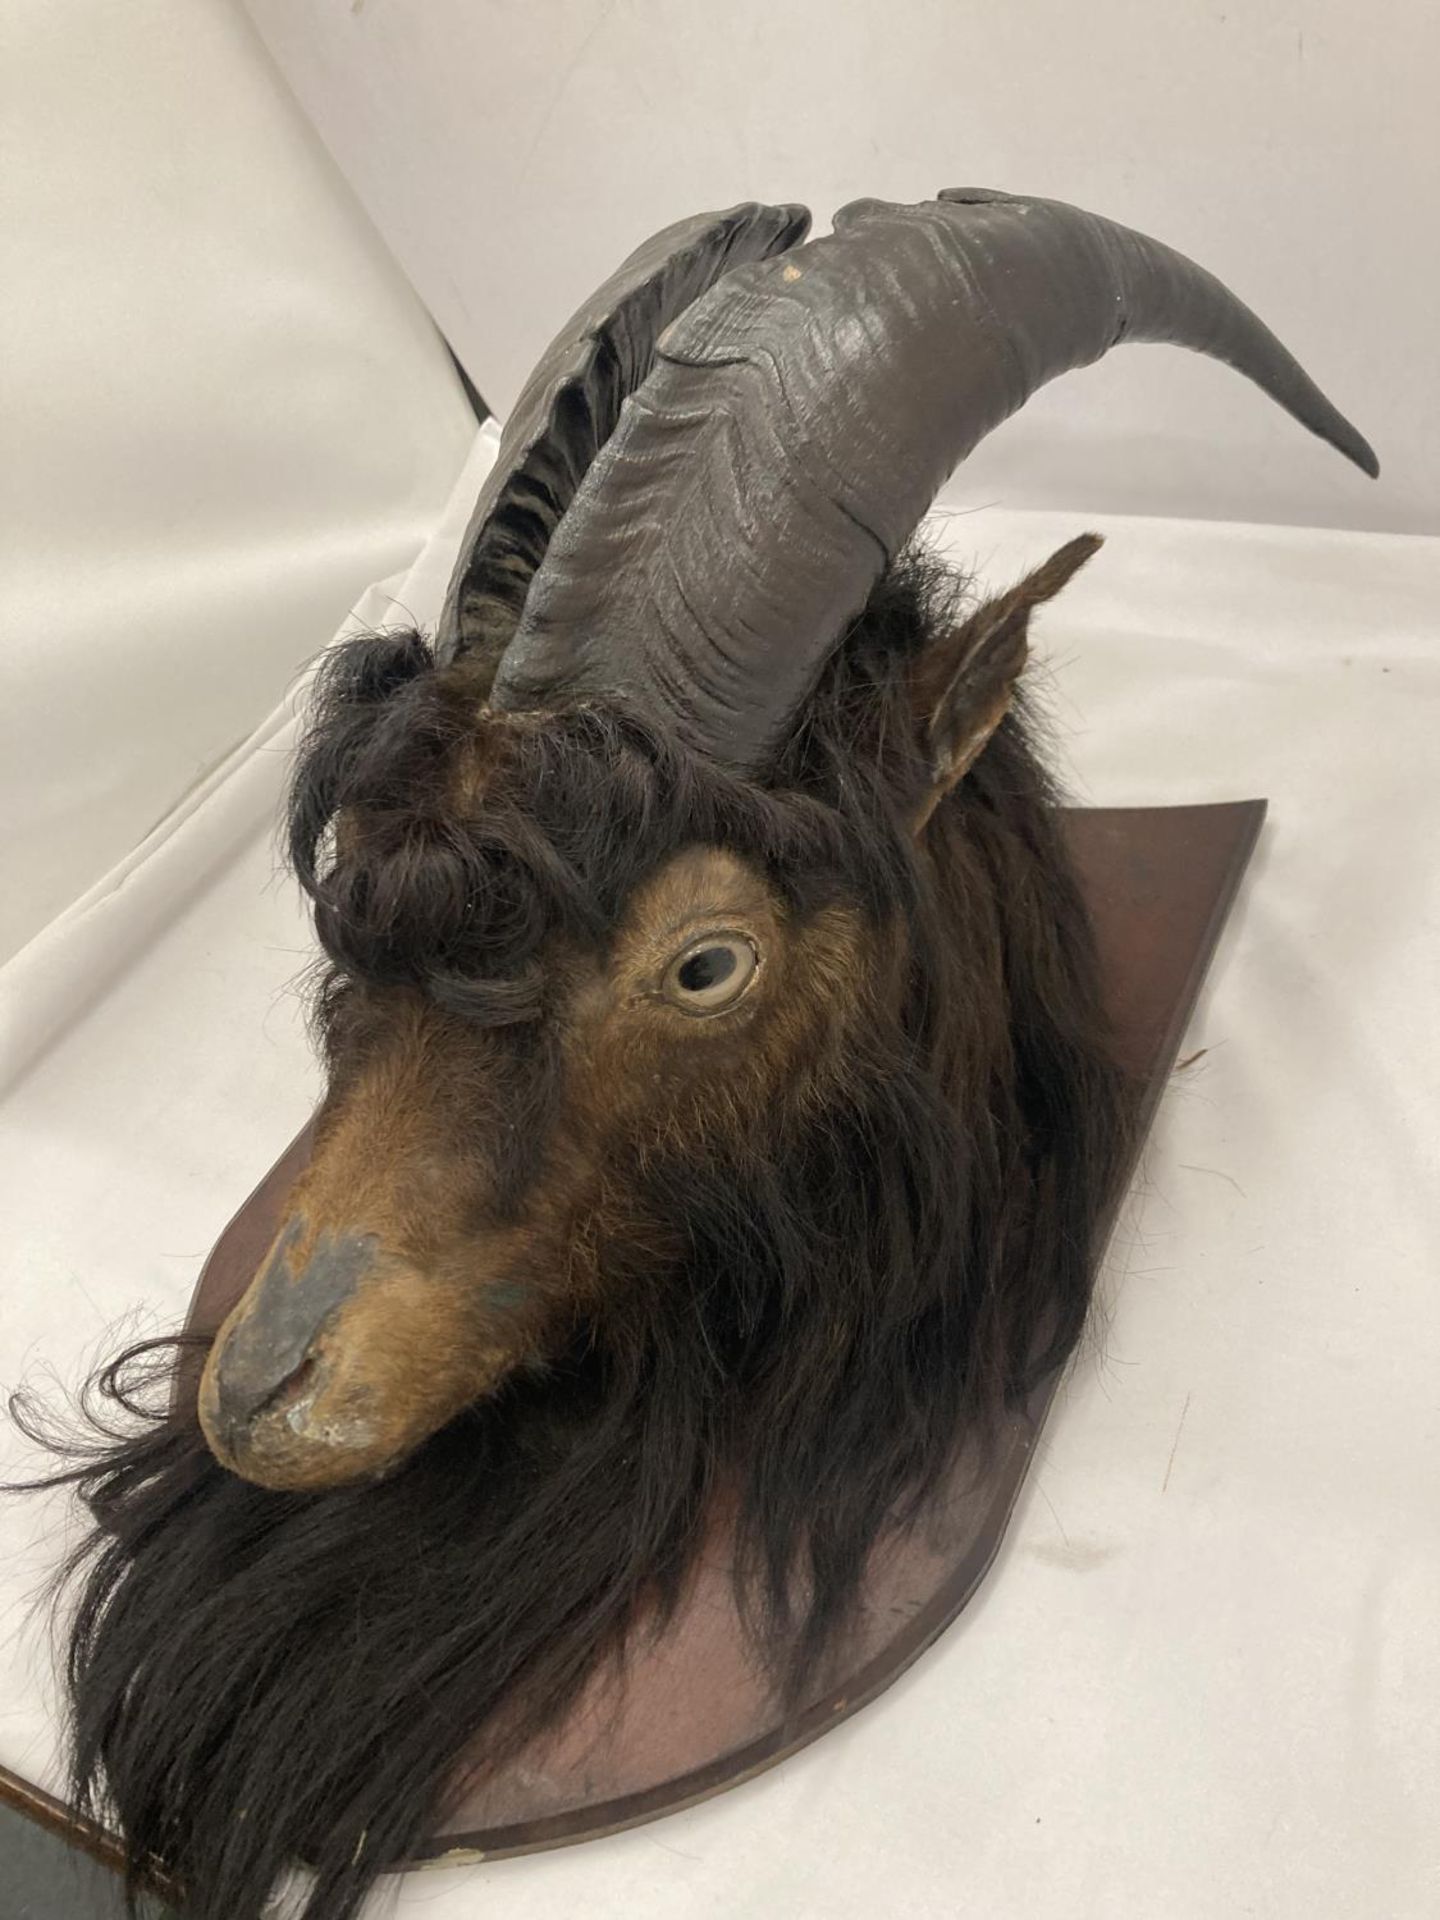 A TAXIDERMY GOAT HEAD ON A WOODEN PLAQUE - Image 2 of 5